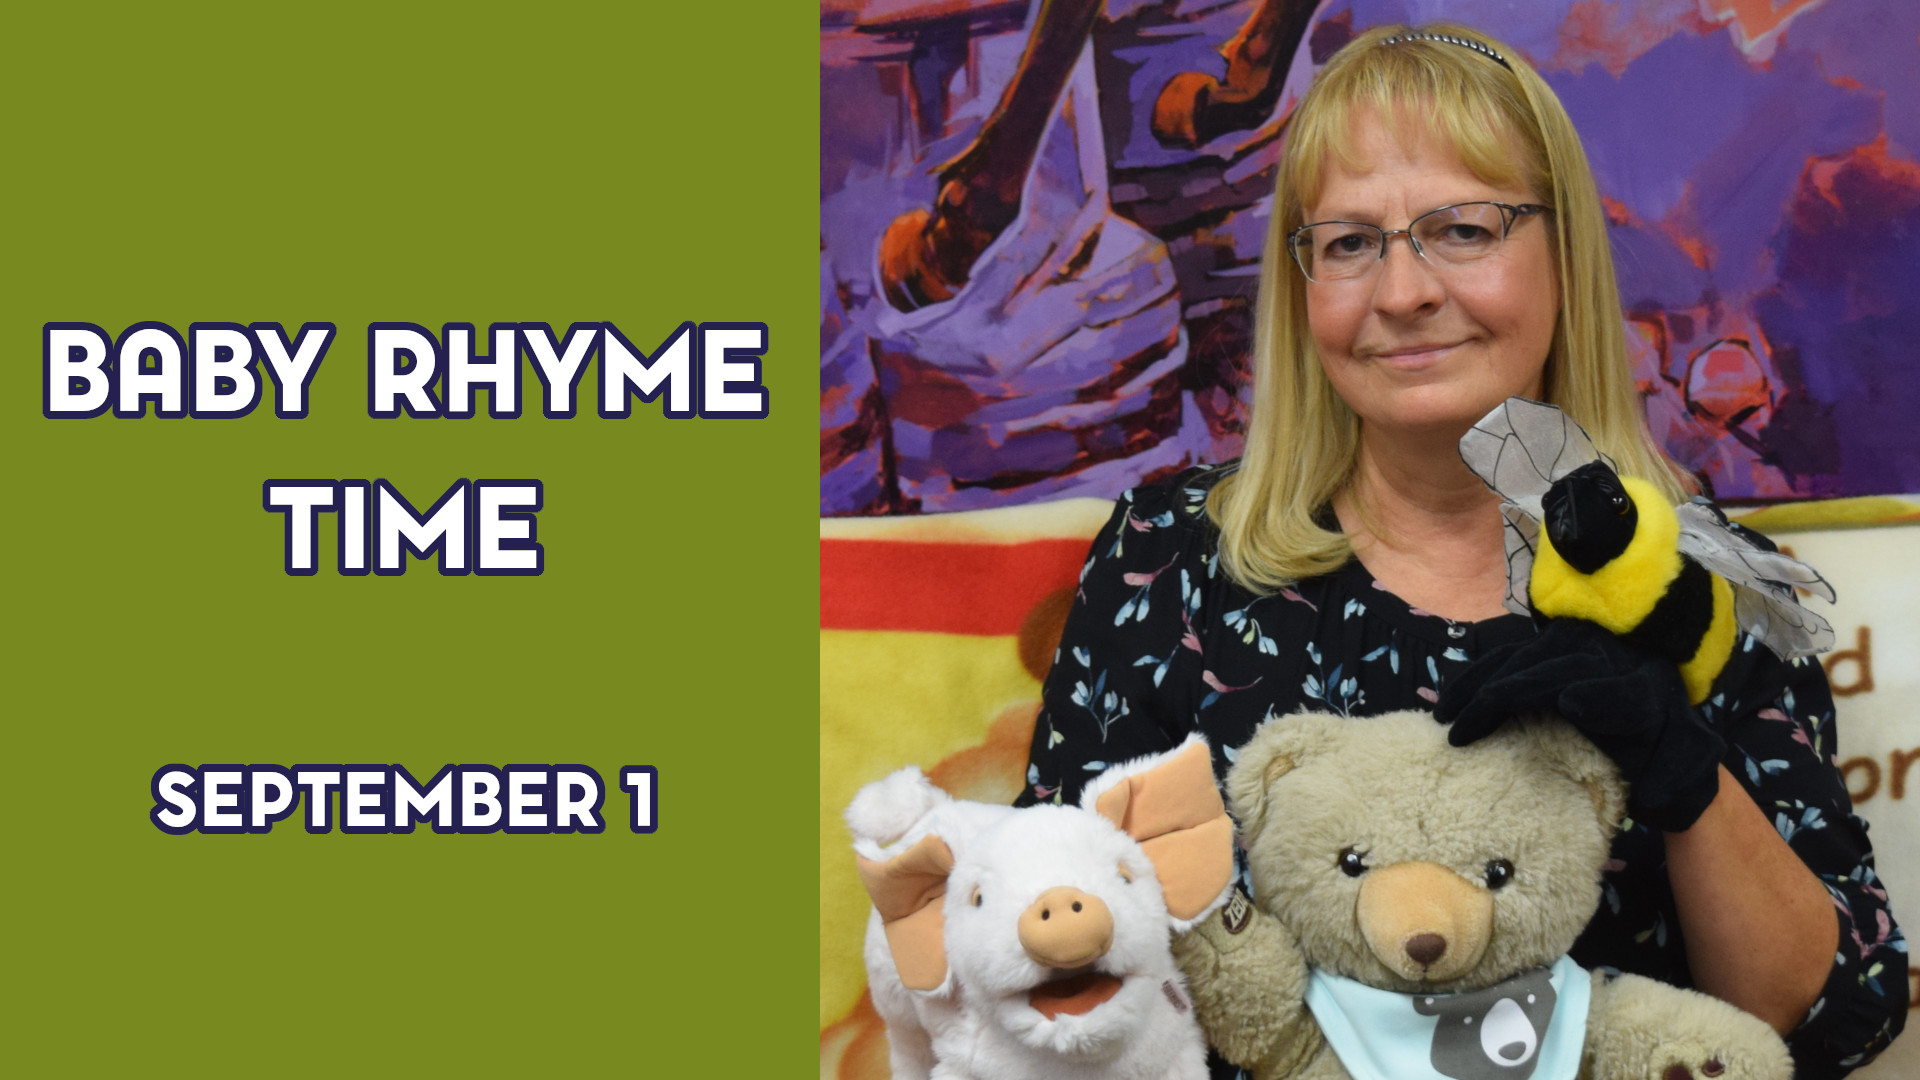 A woman holds stuffed animals next to the text "Baby Rhyme Time September 1"